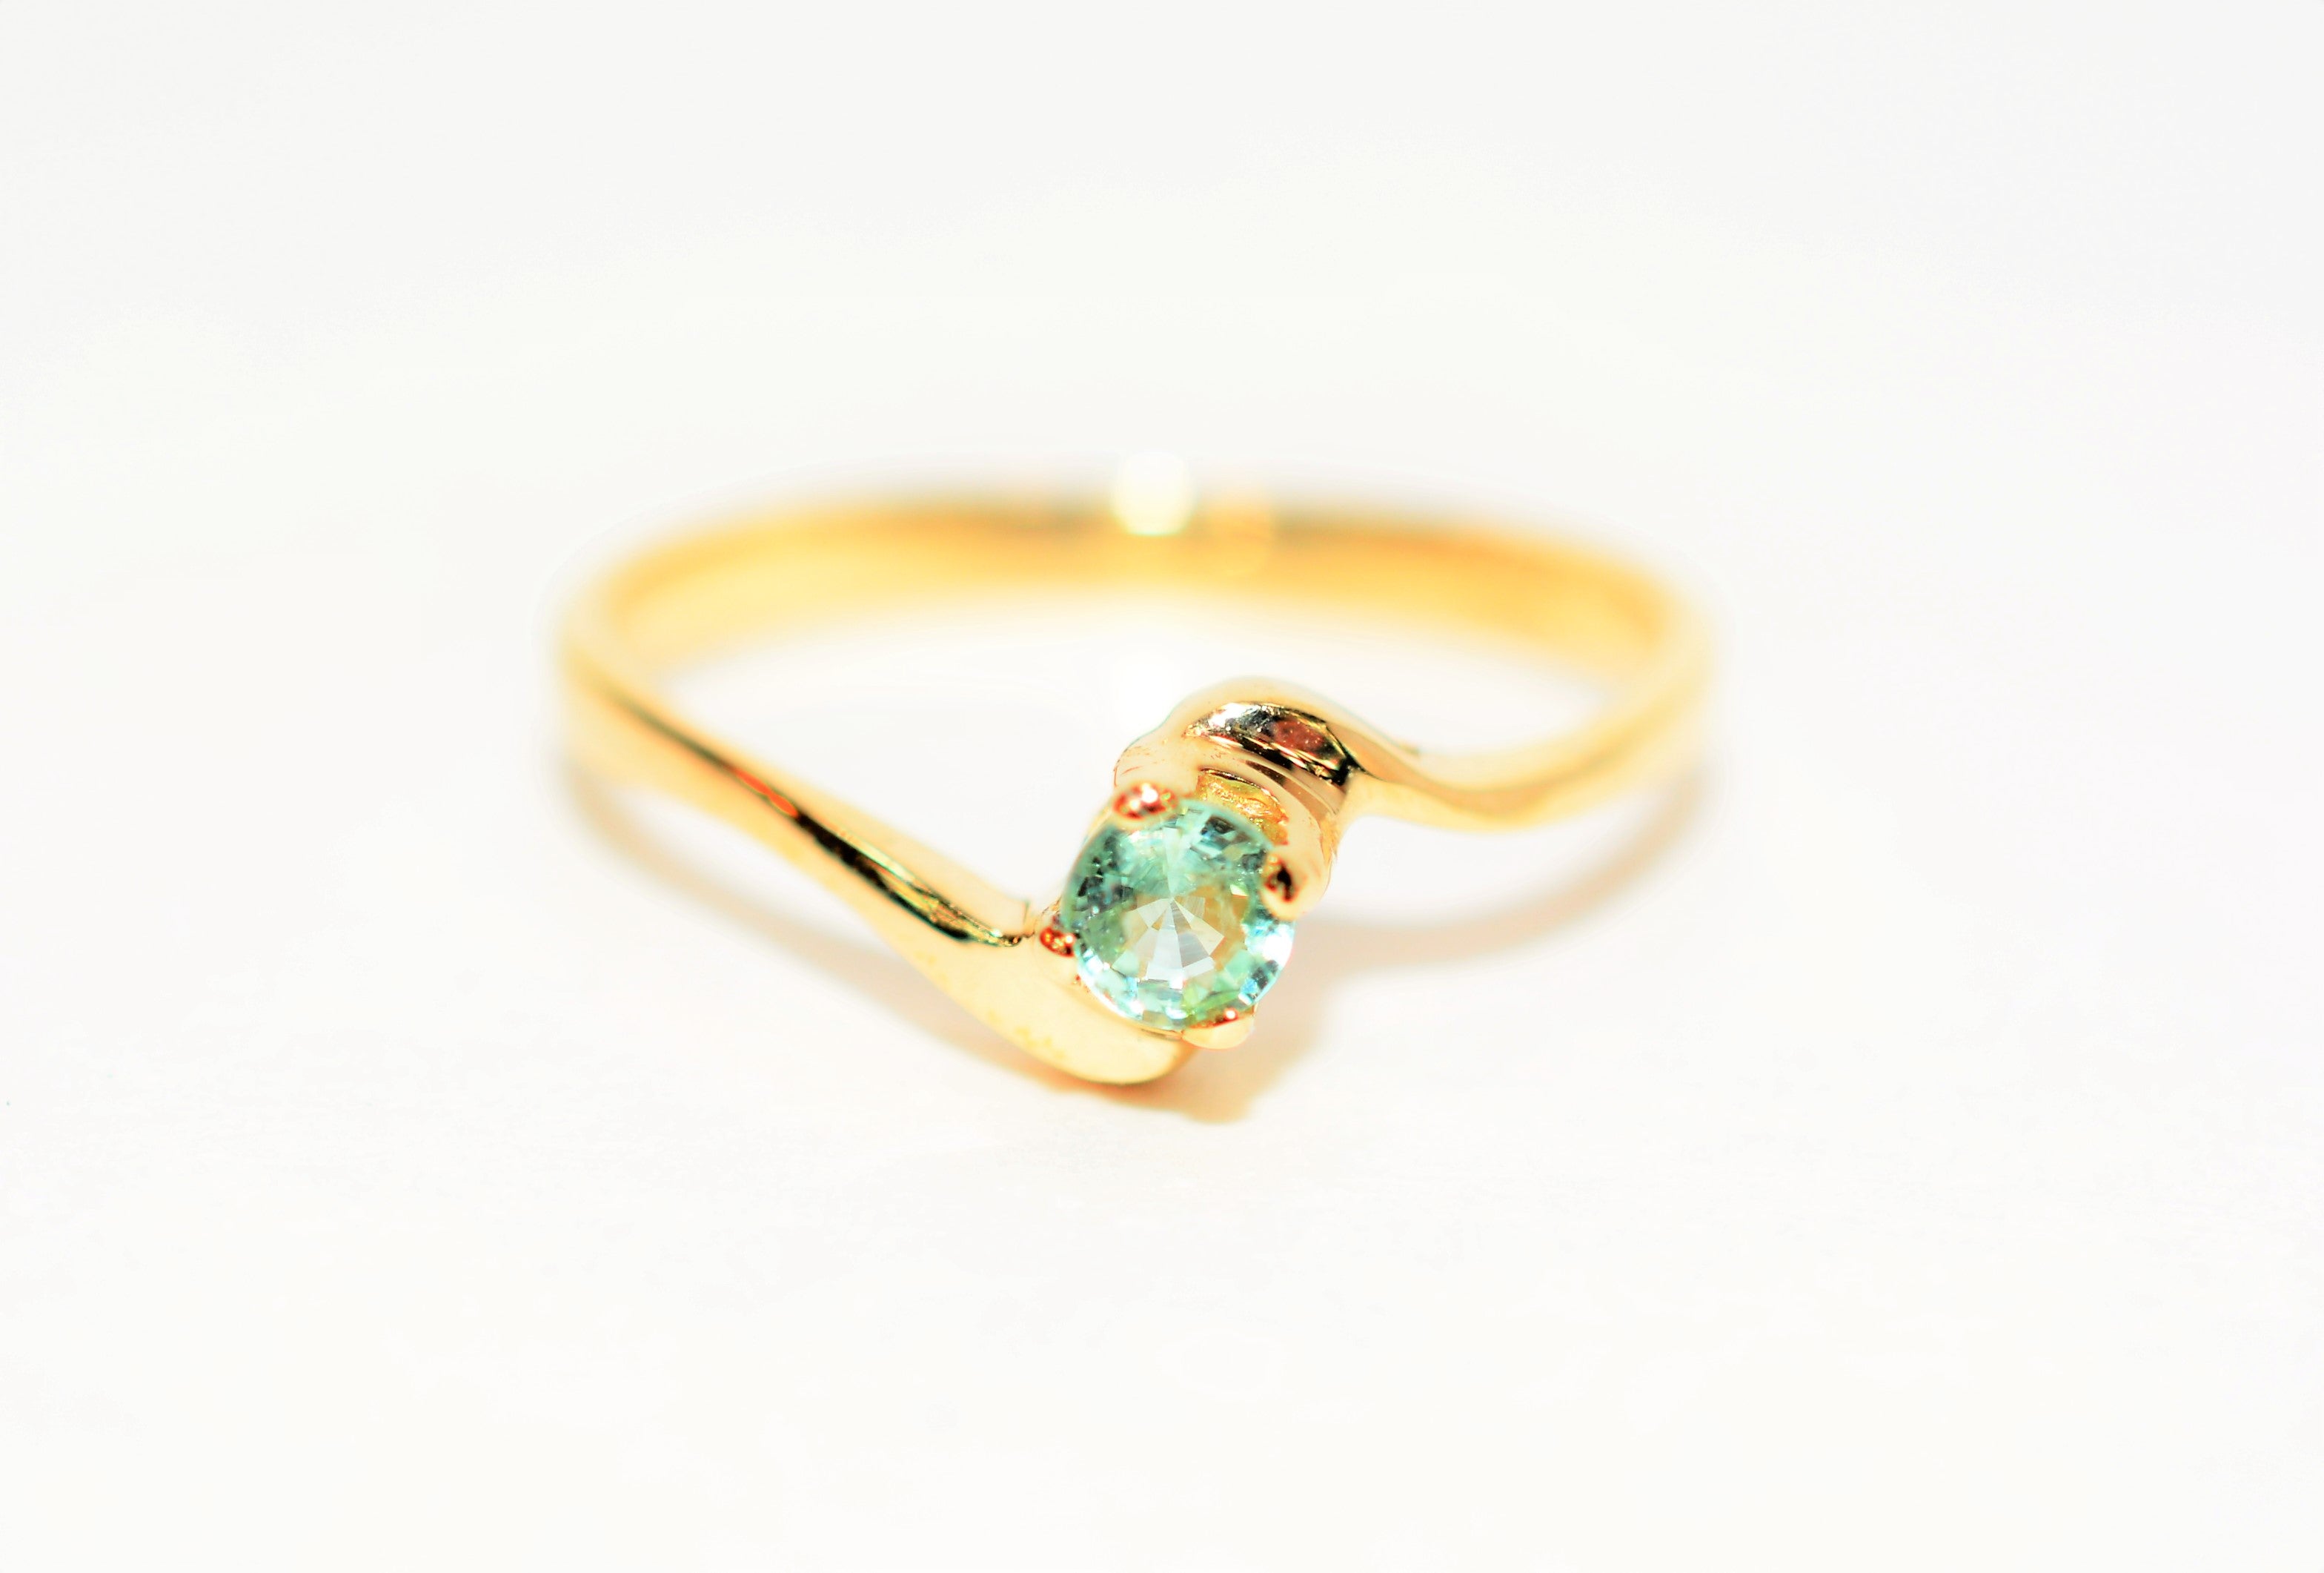 Natural Paraiba Tourmaline Ring 10K Solid Gold .22ct Solitaire Ring Gemstone Ring Women's Ring Birthstone Ring Fine Jewelry Engagement Ring